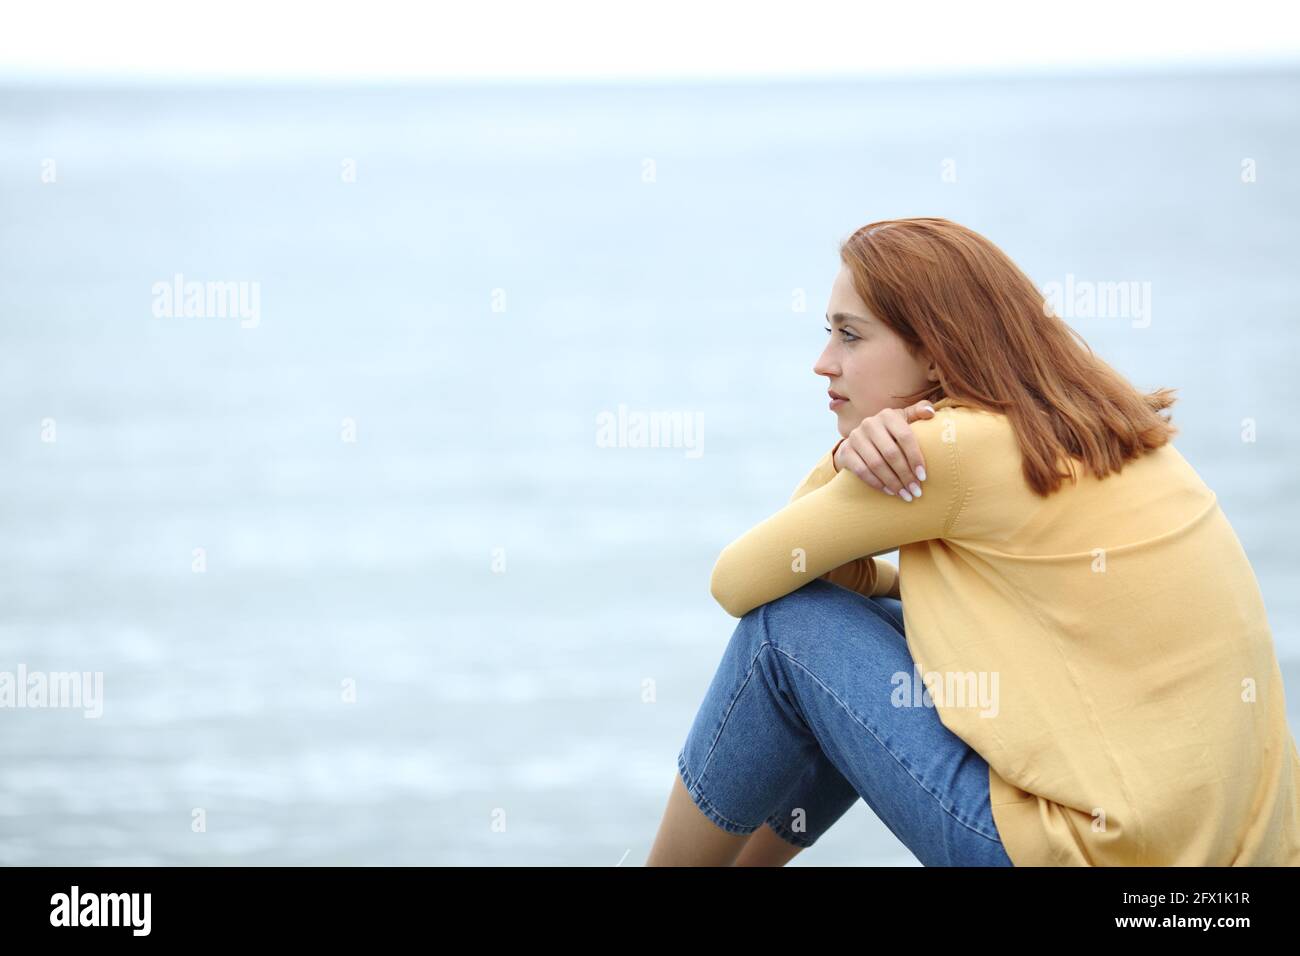 Serious pensive woman contemplating on the beach Stock Photo